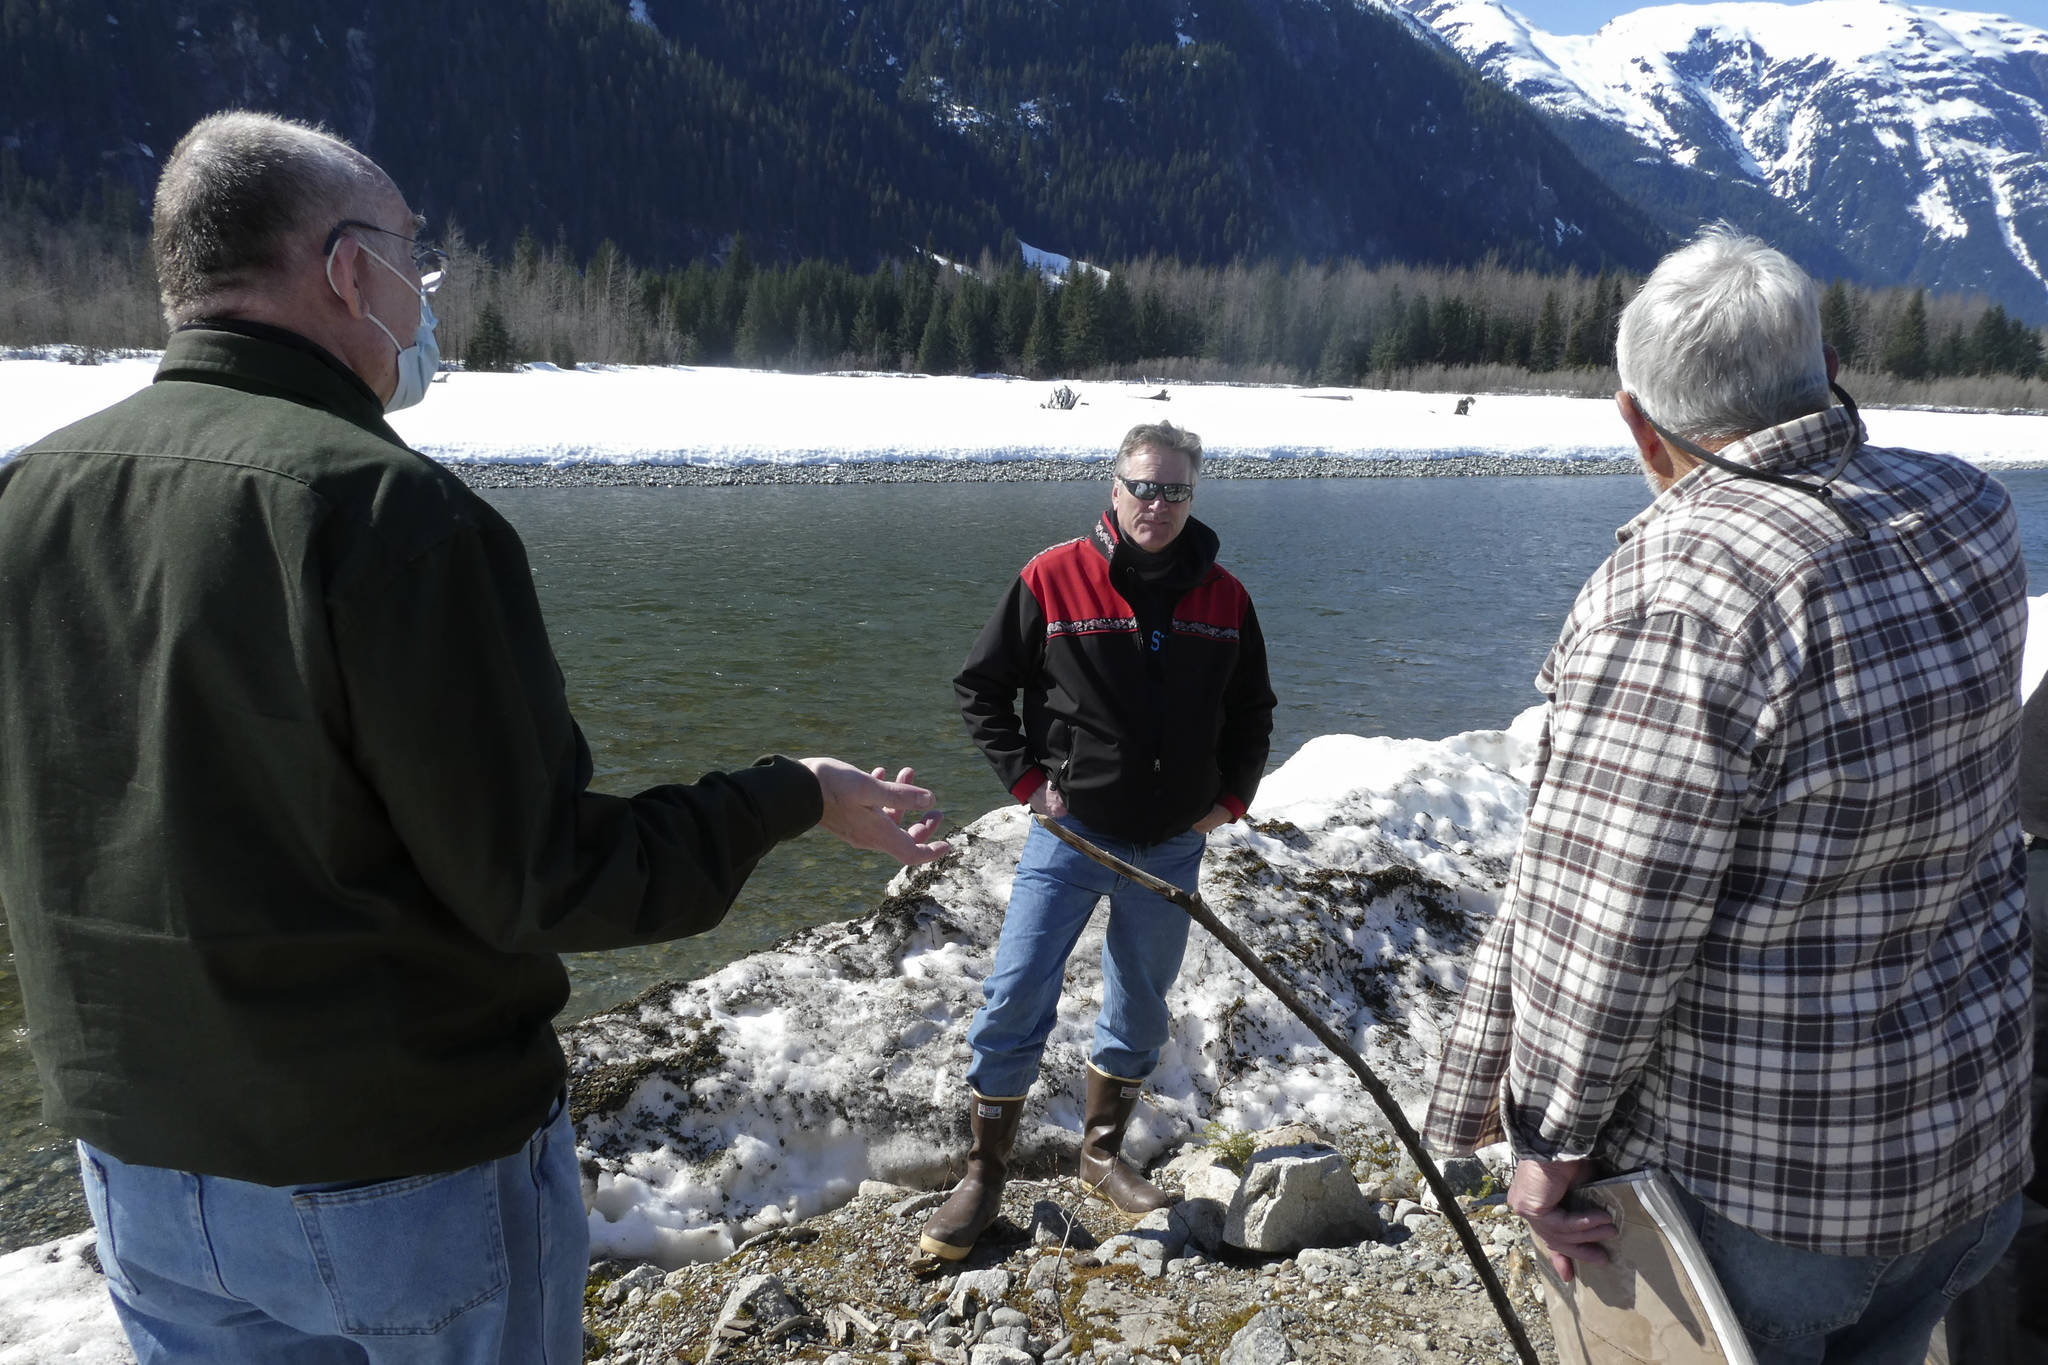 Alaska Gov. Mike Dunleavy, center, listens as residents discuss a levee they have concerns with on Thursday, April 22, 2021, in Hyder, Alaska. Hyder was among the southeast Alaska communities that Dunleavy visited as part of a one-day trip. (AP Photo/Becky Bohrer)